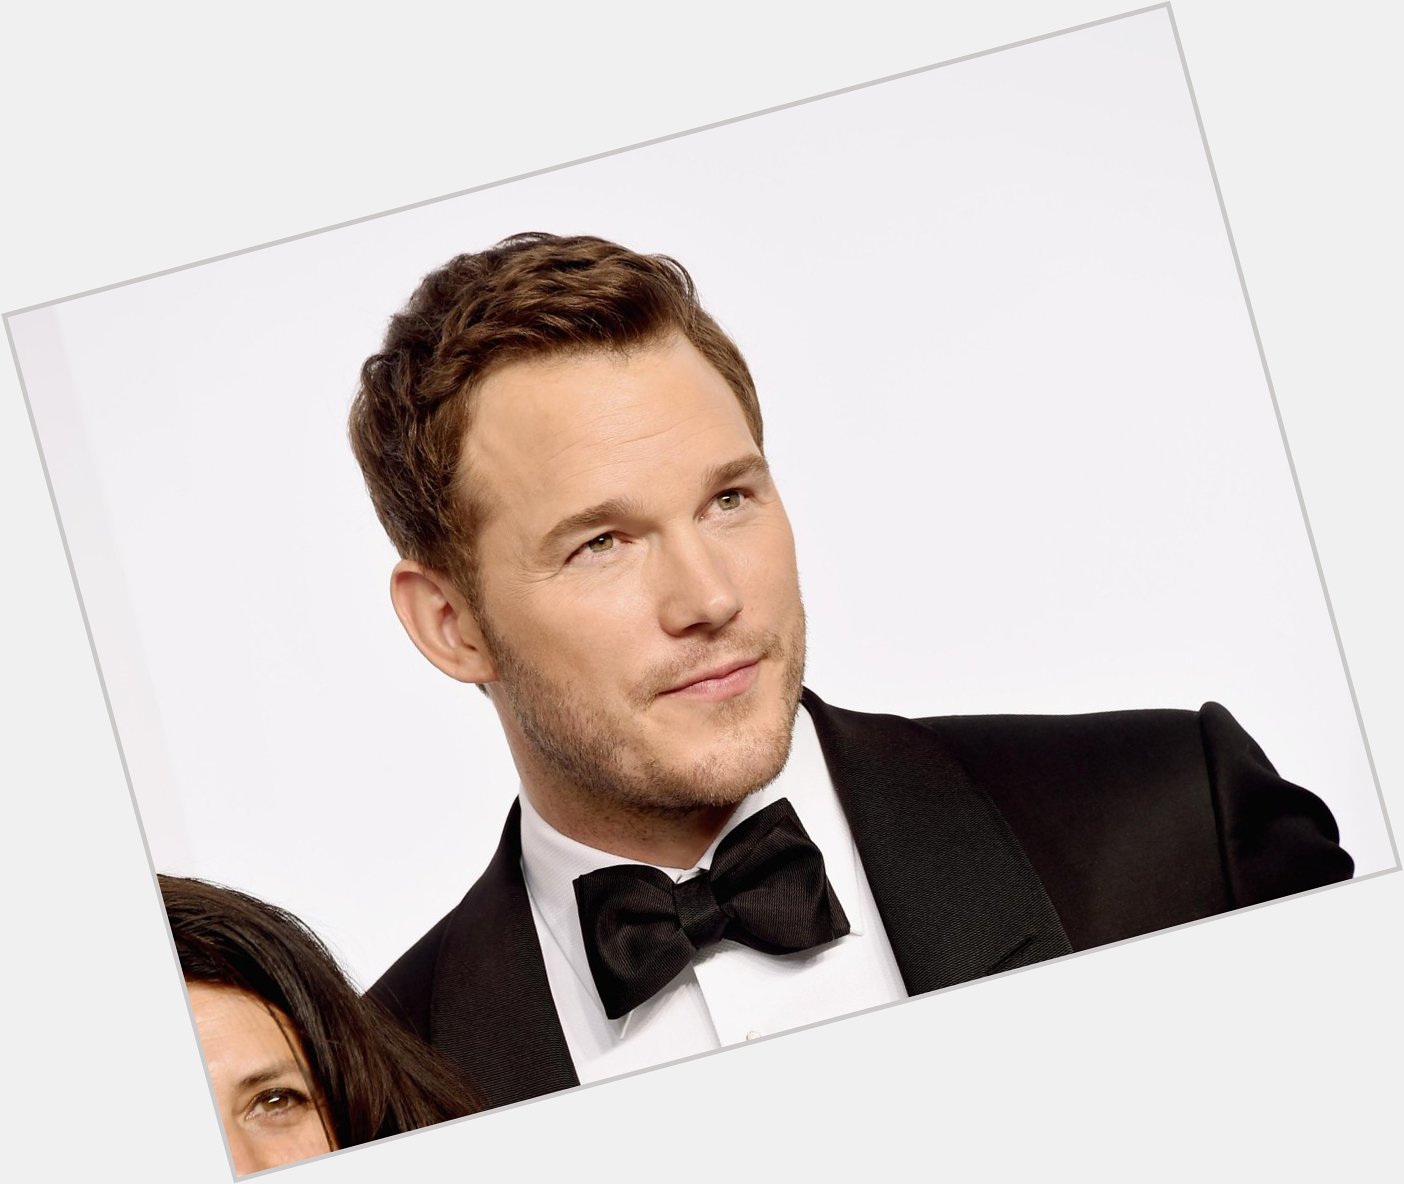 Happy birthday to the raptor whisperer, the galaxy s guardian, & the frontman the one & only Chris Pratt! 